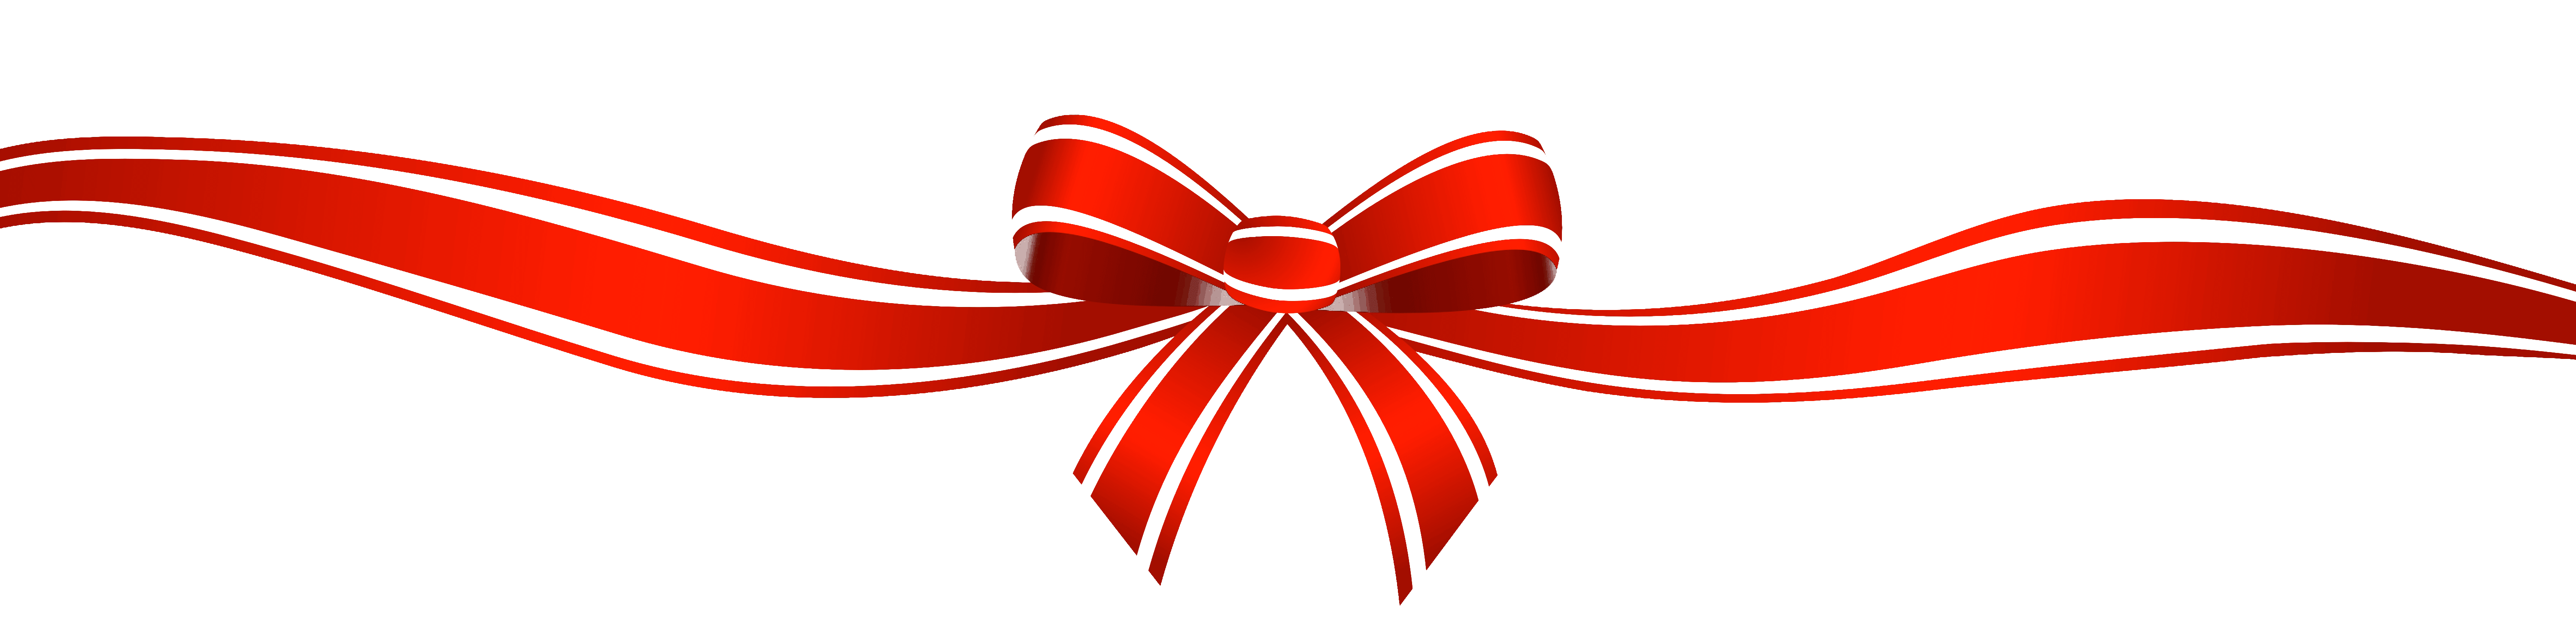 Red Ribbon Bow Clipart   Free Clip Art Images